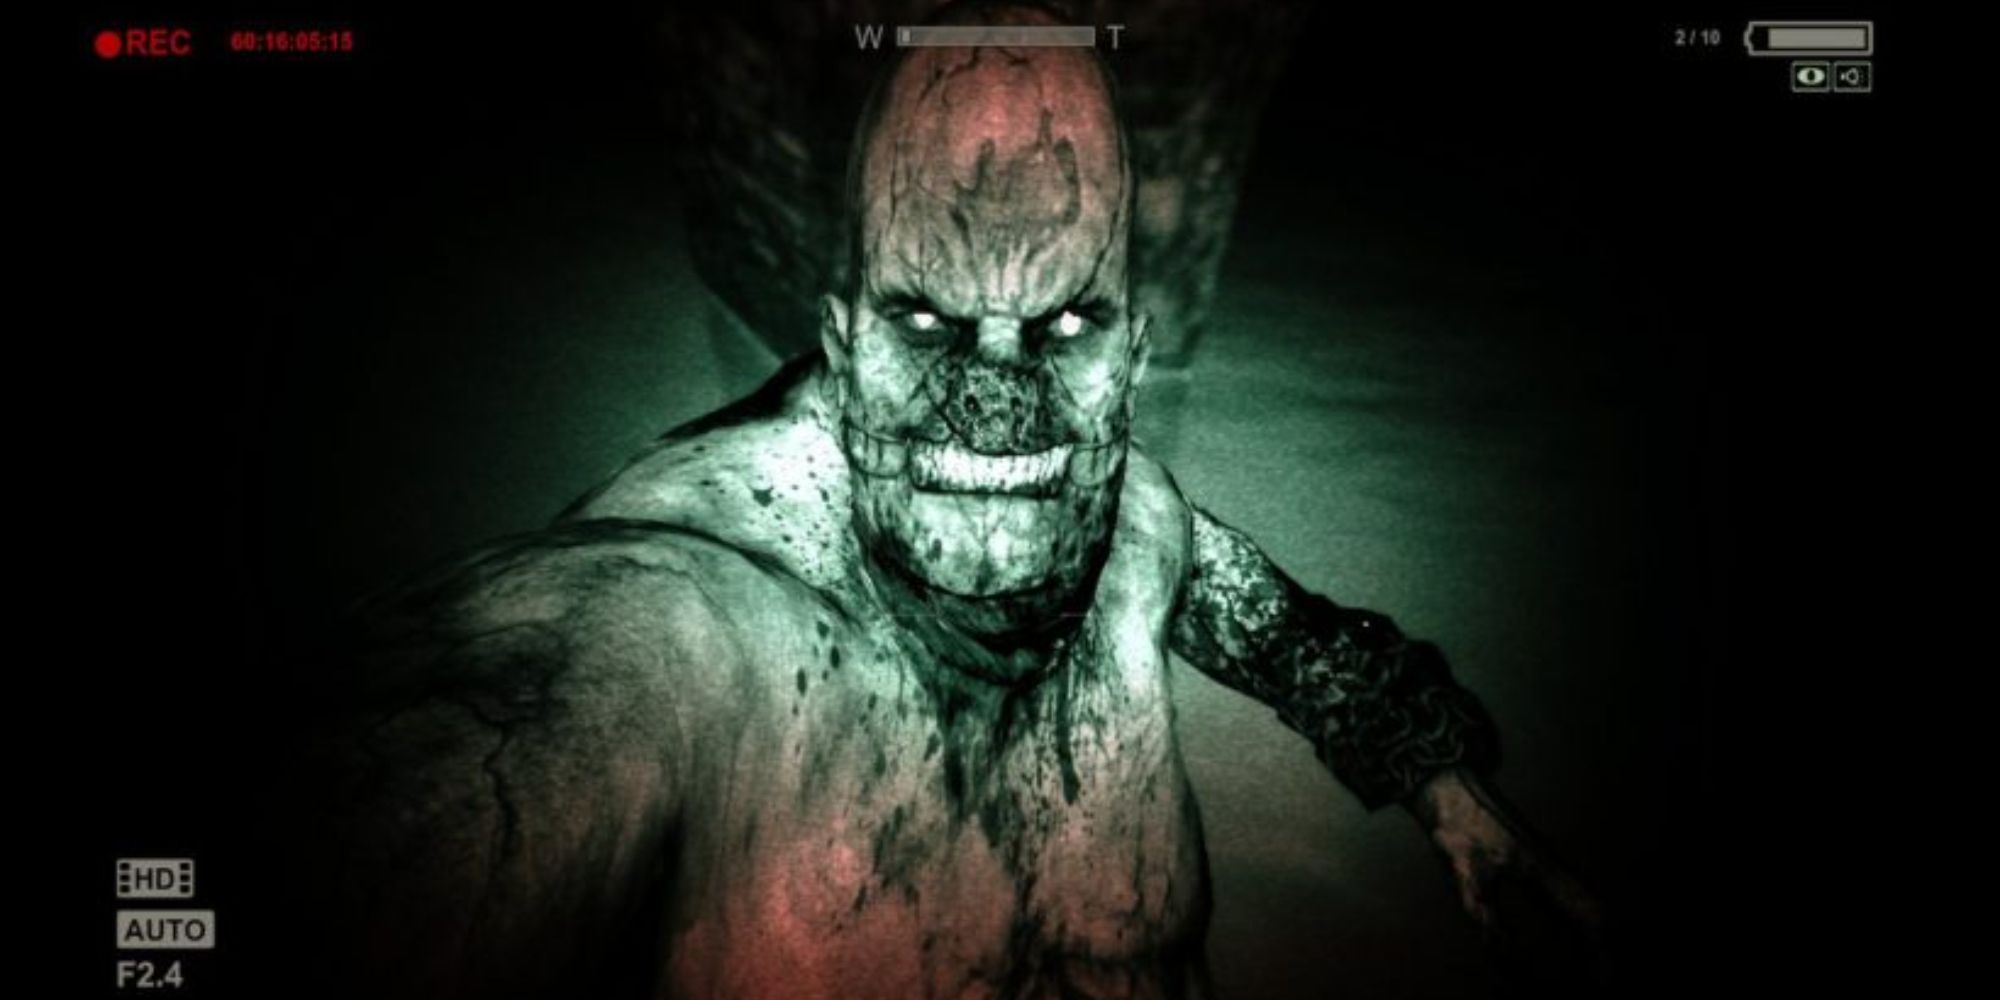 A disfigured mental patient attacking the player in Outlast